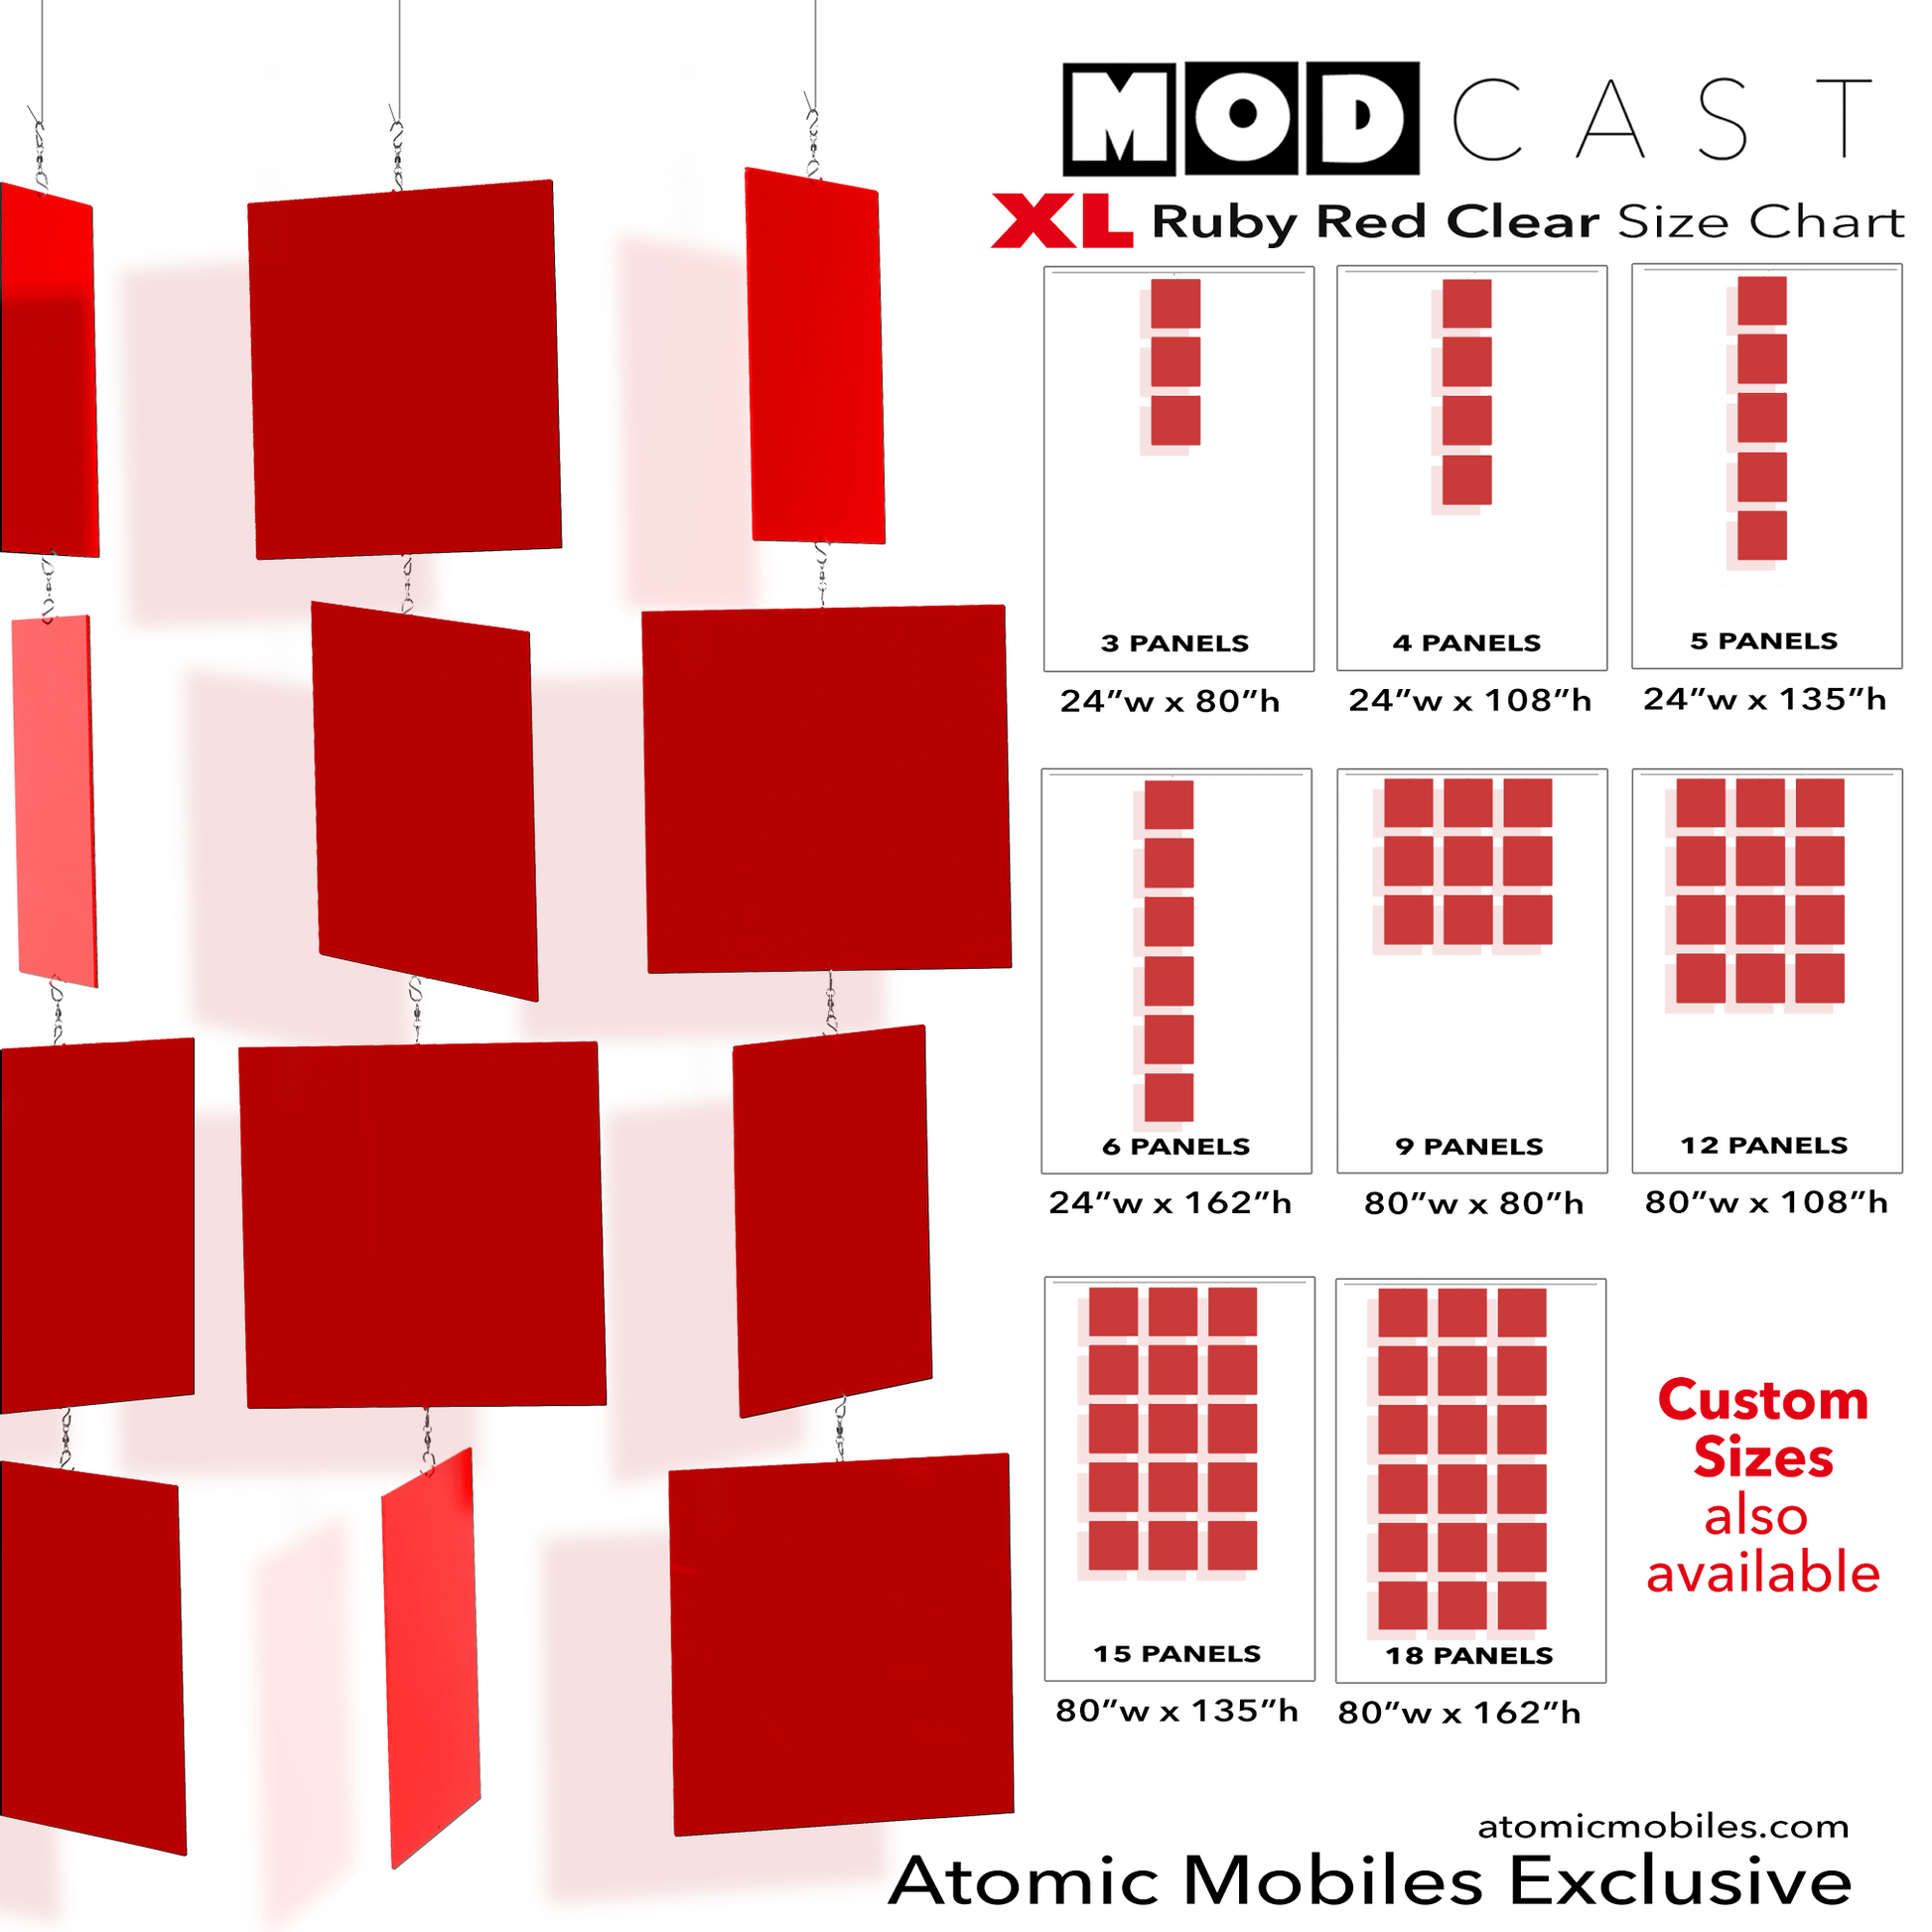 XL MODcast kinetic hanging art mobiles in mid century modern style in red clear acrylic plexiglass by AtomicMobiles.com